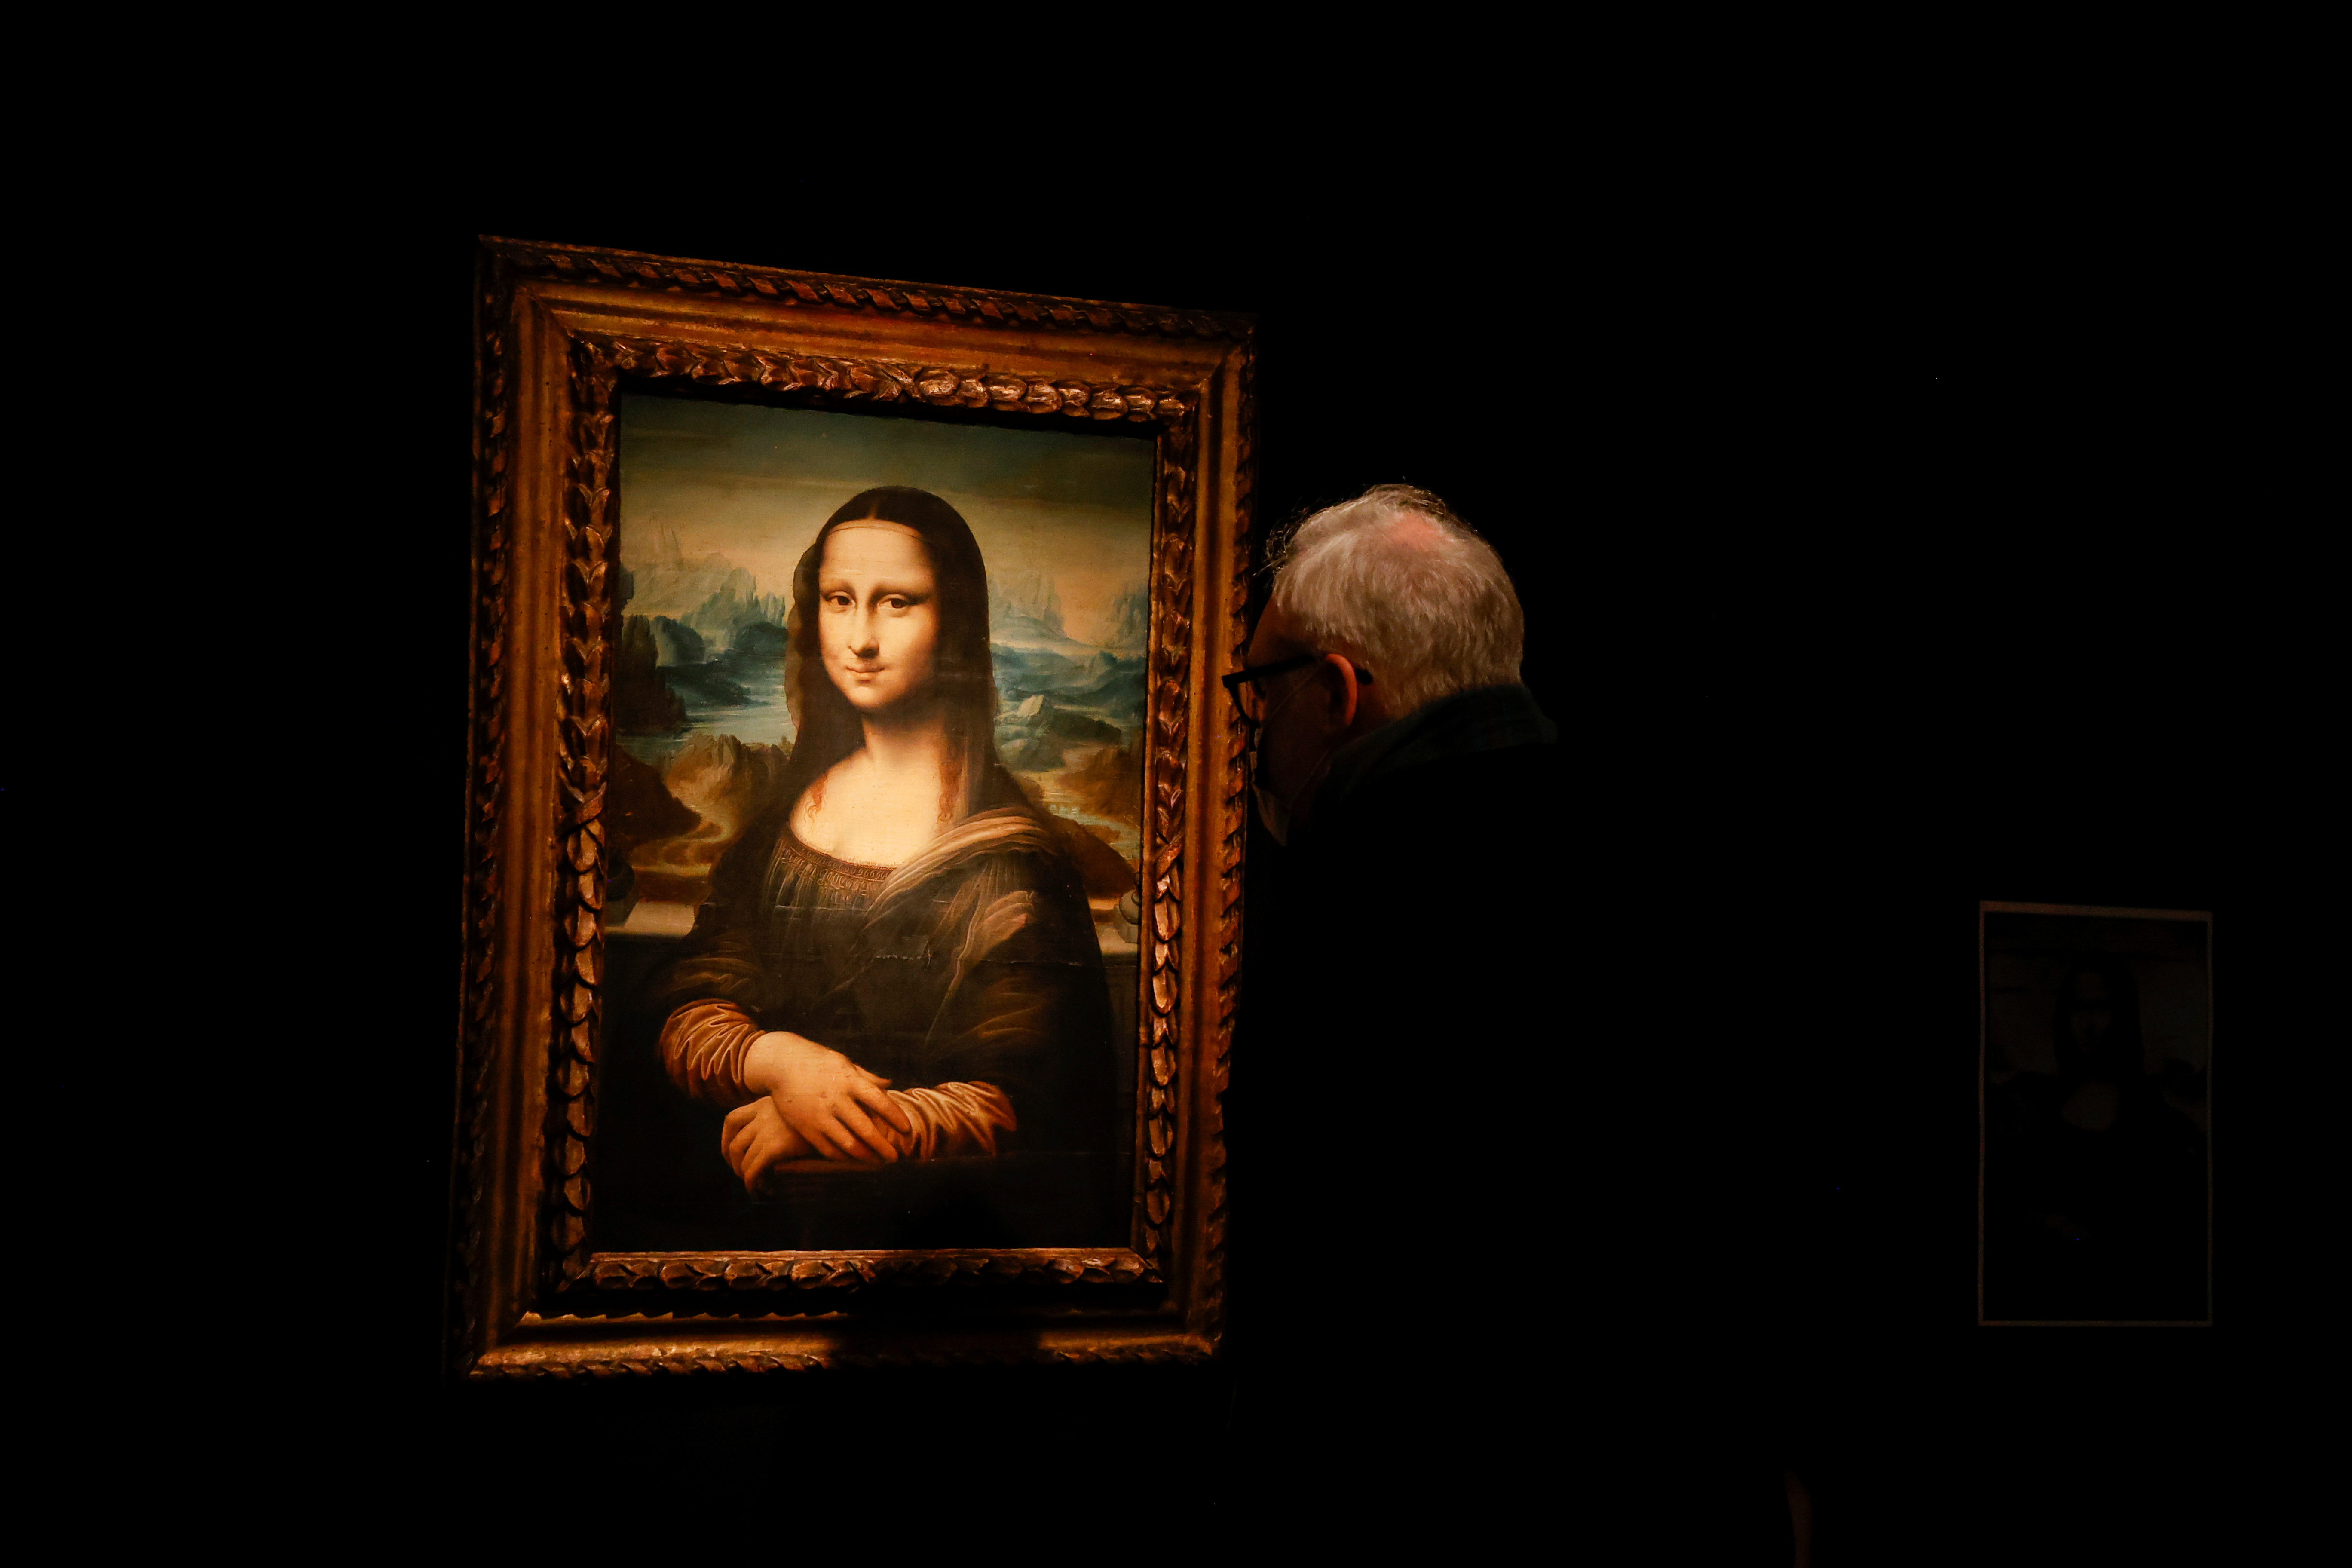 A visitor looks at a copy of Leonardo da Vinci's Mona Lisa, which will go on auction on November 9 at the Artcurial auction house in Paris, France, on November 5, 2021. REUTERS / Noemie Olive